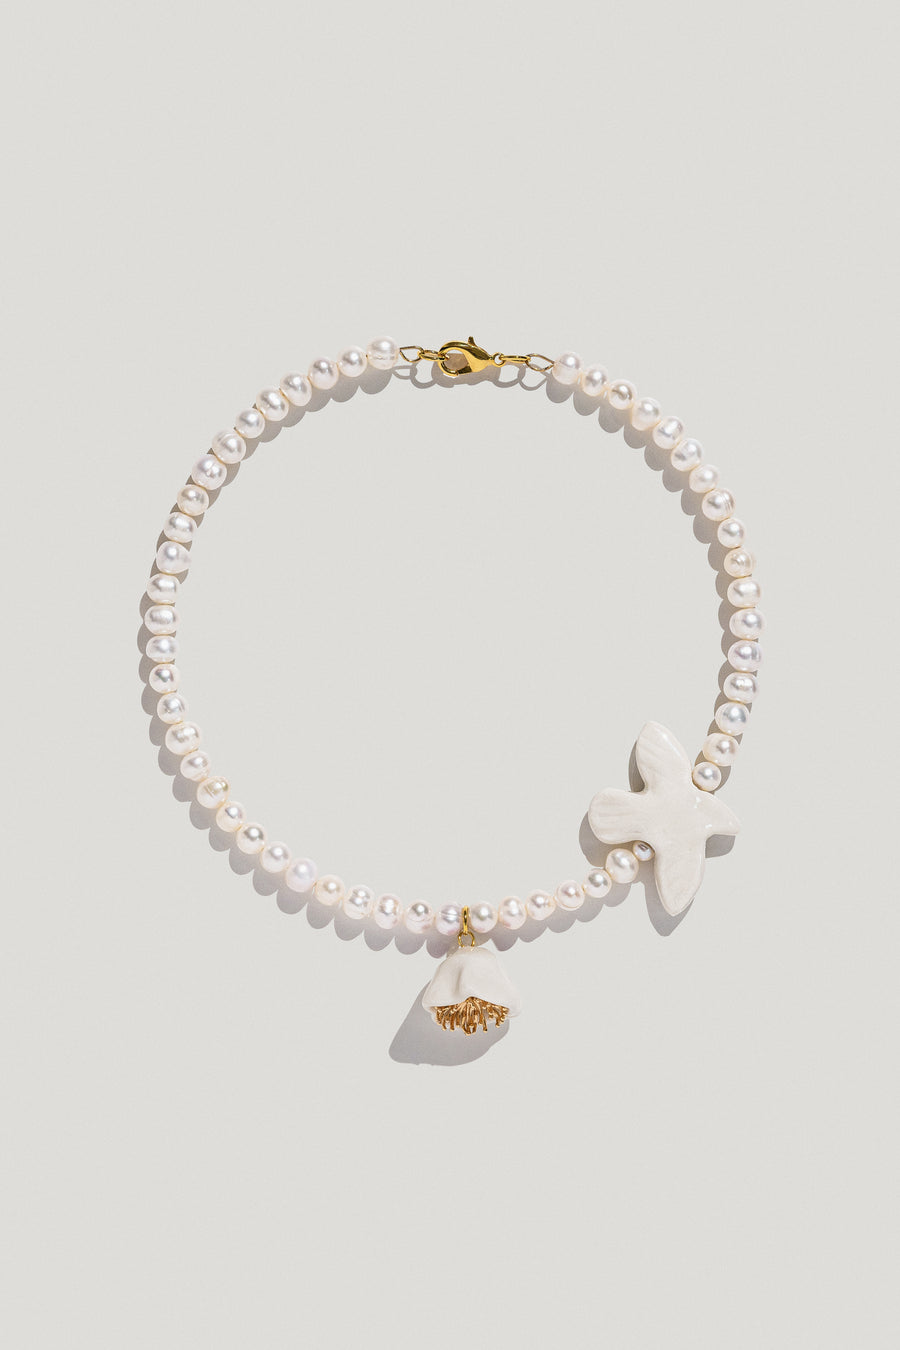 Polysk pearl necklace with bird and poppy flower